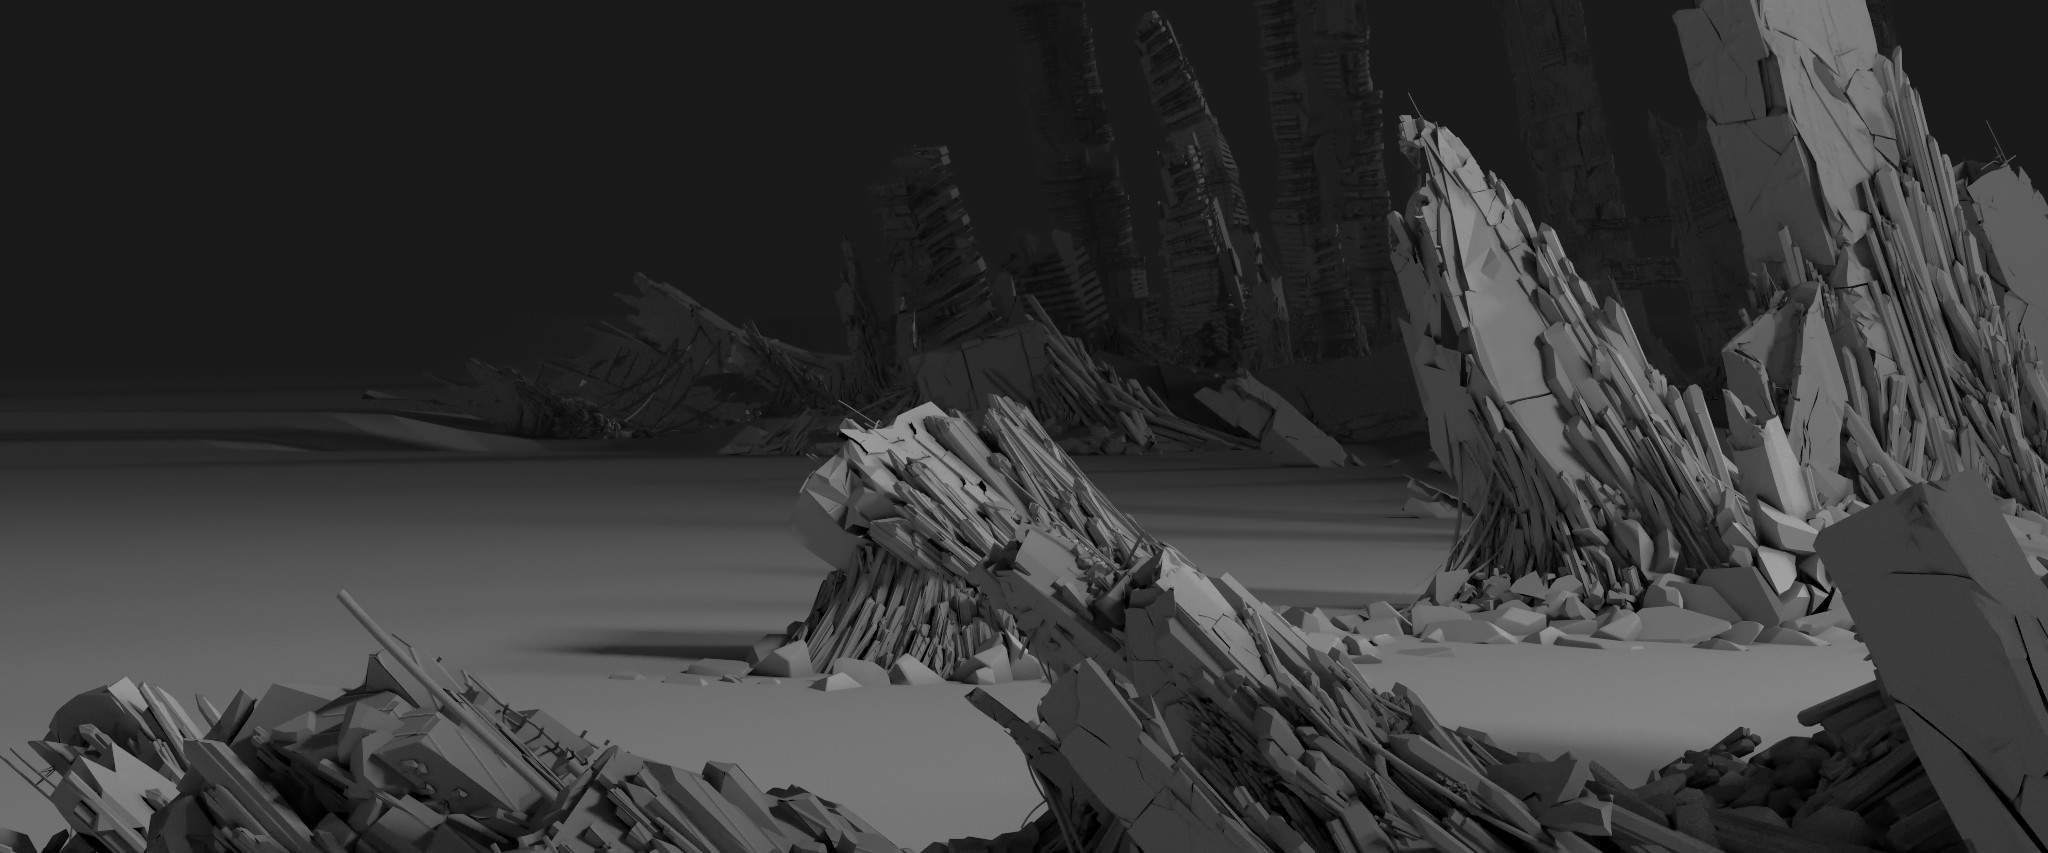 Environment (pillars, rocks and cables) additional modeling - breakdown